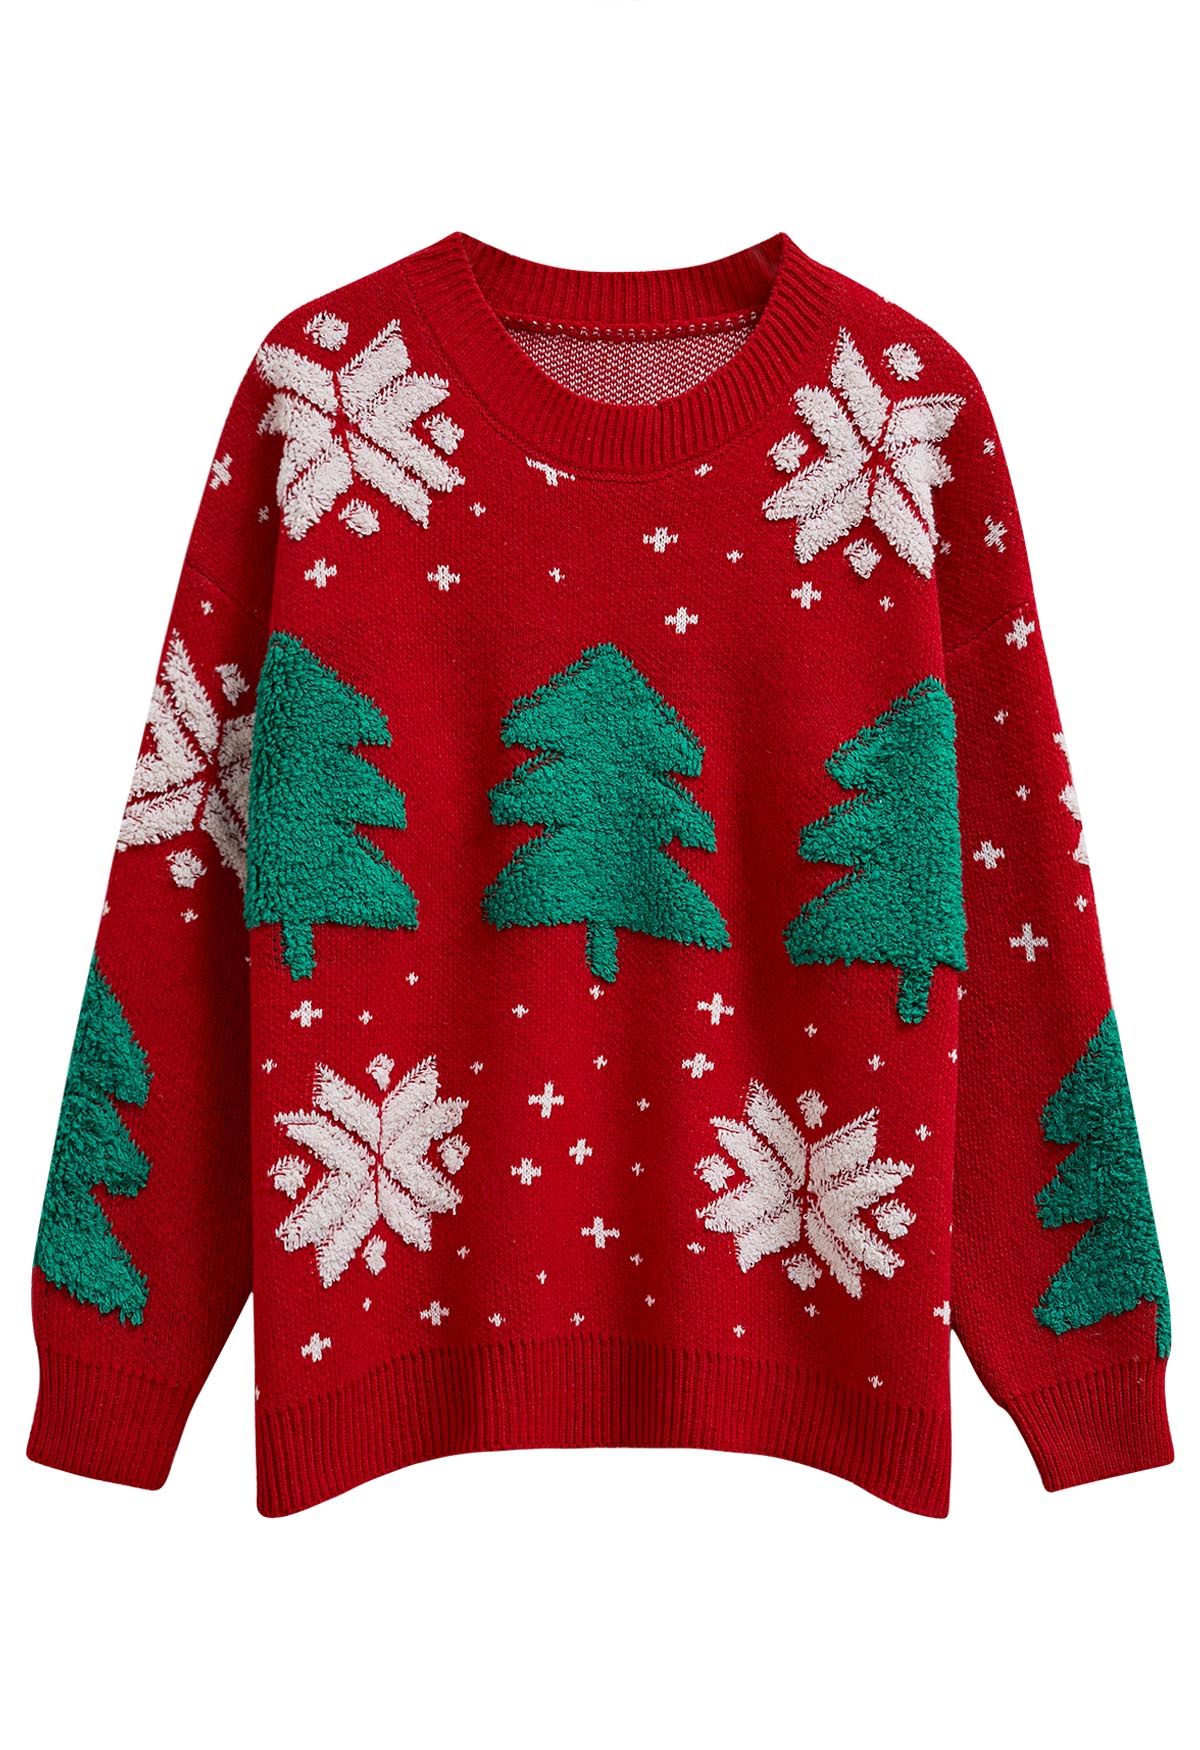 Christmas Tree and Snowflake Jacquard Knit Sweater in Red - Retro ...